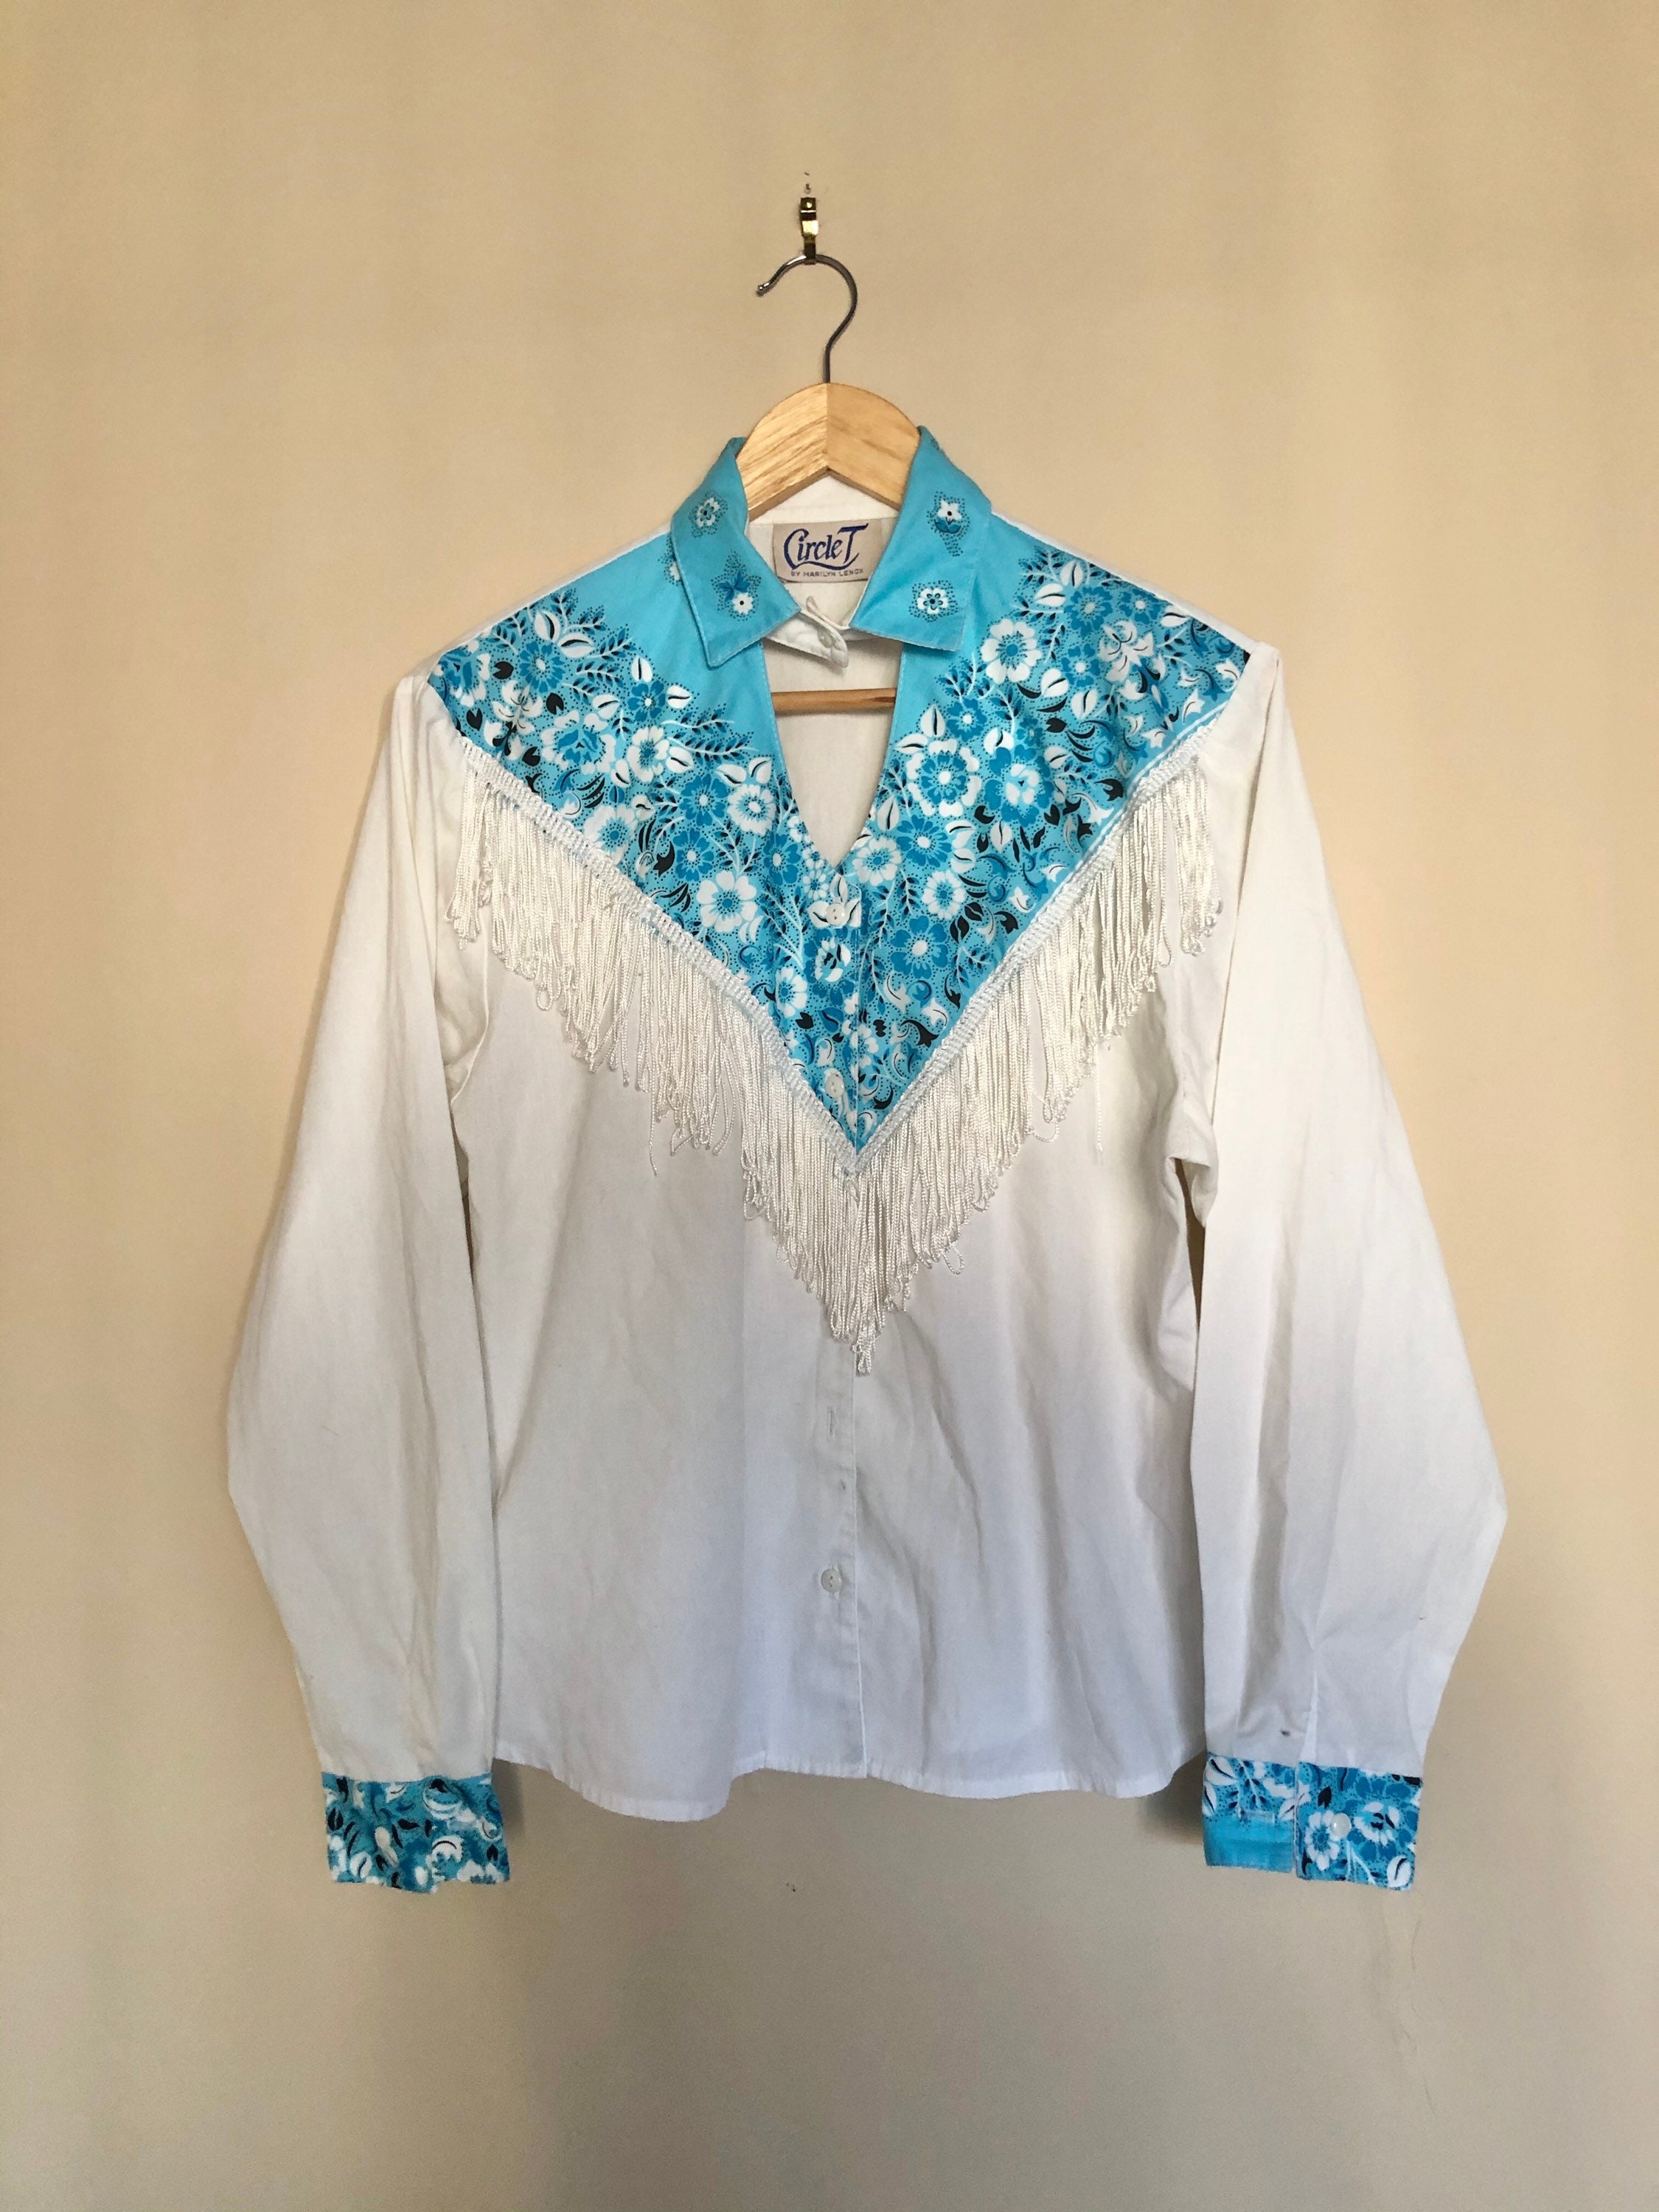 Vintage Women's Western Shirt White With Blue Paisley - Etsy